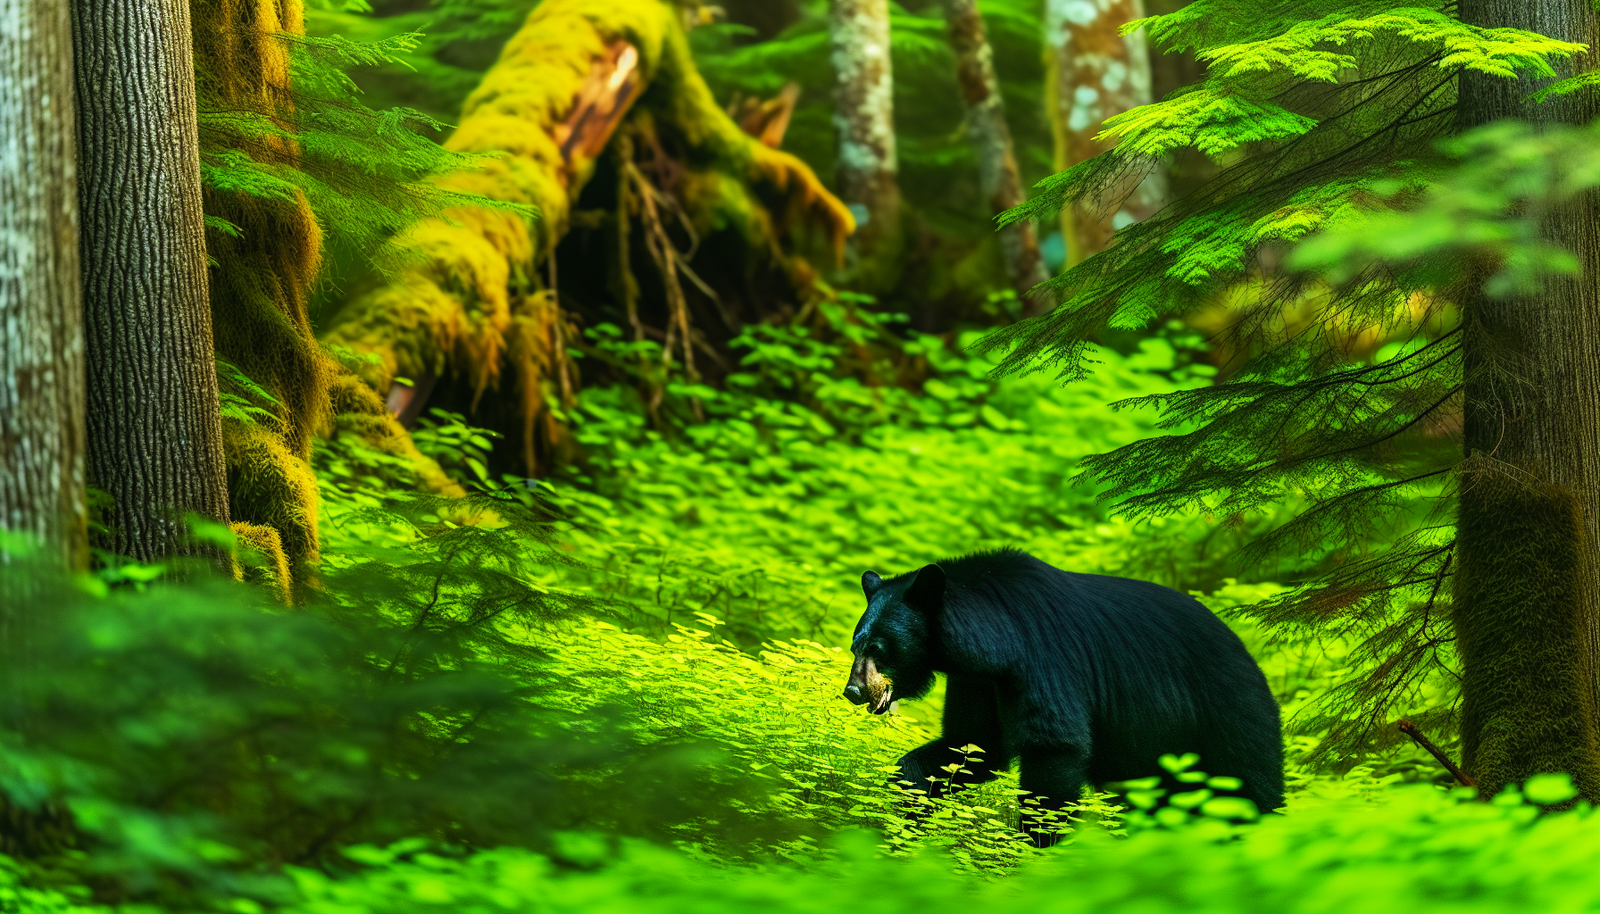 Enchanting encounter with a black bear in the forests of Haida Gwaii